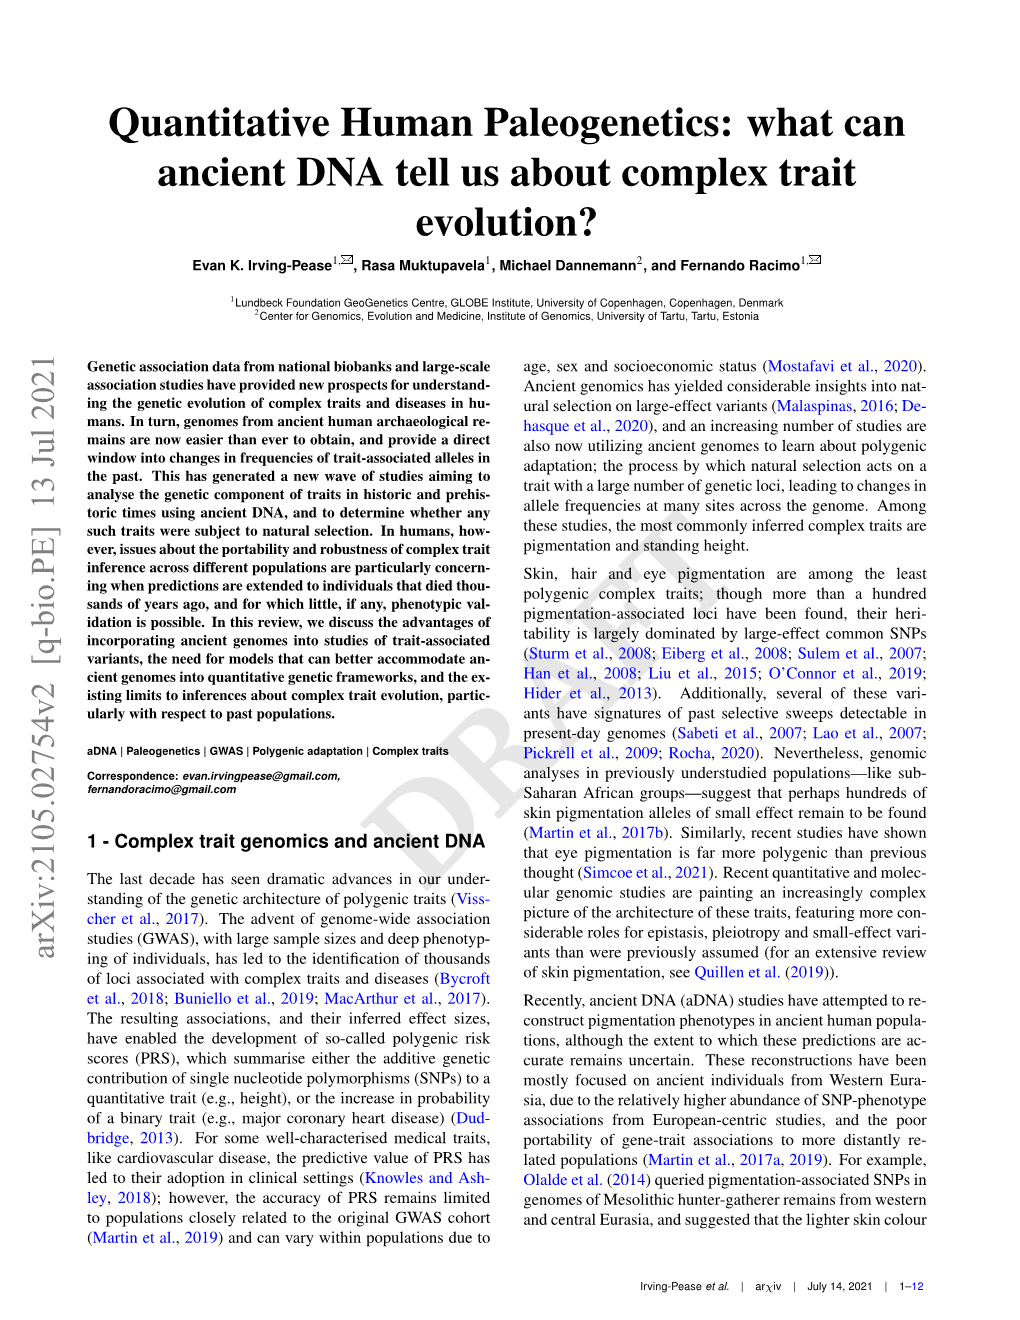 What Can Ancient DNA Tell Us About Complex Trait Evolution?